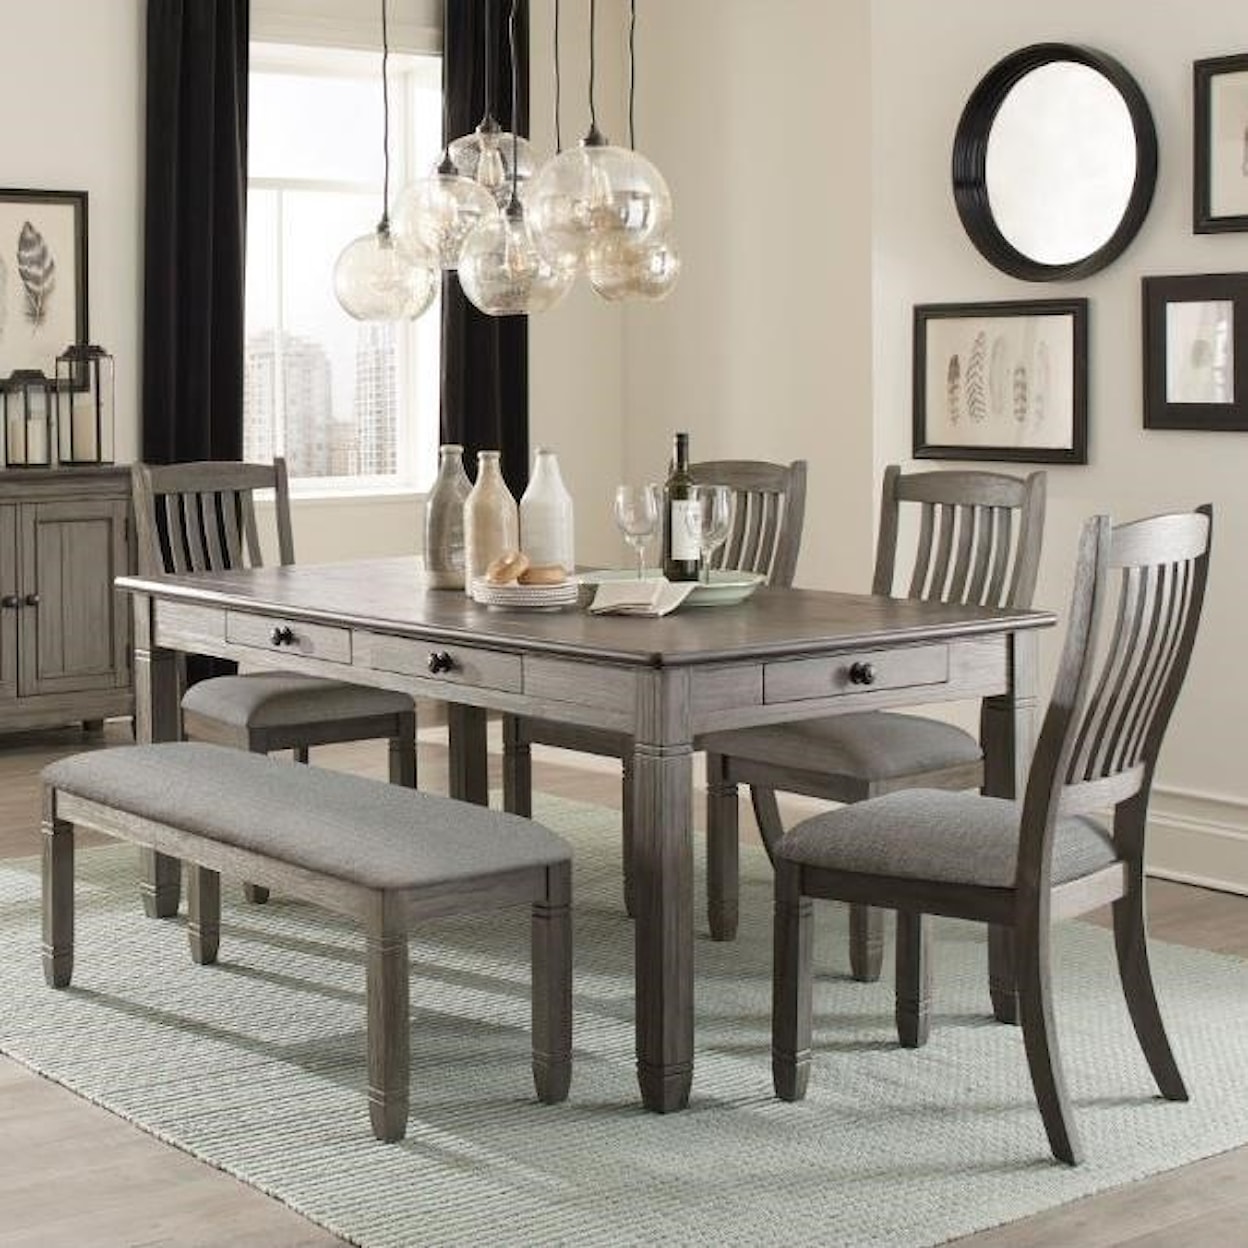 Homelegance Granby 6-Piece Table and Chair Set with Bench